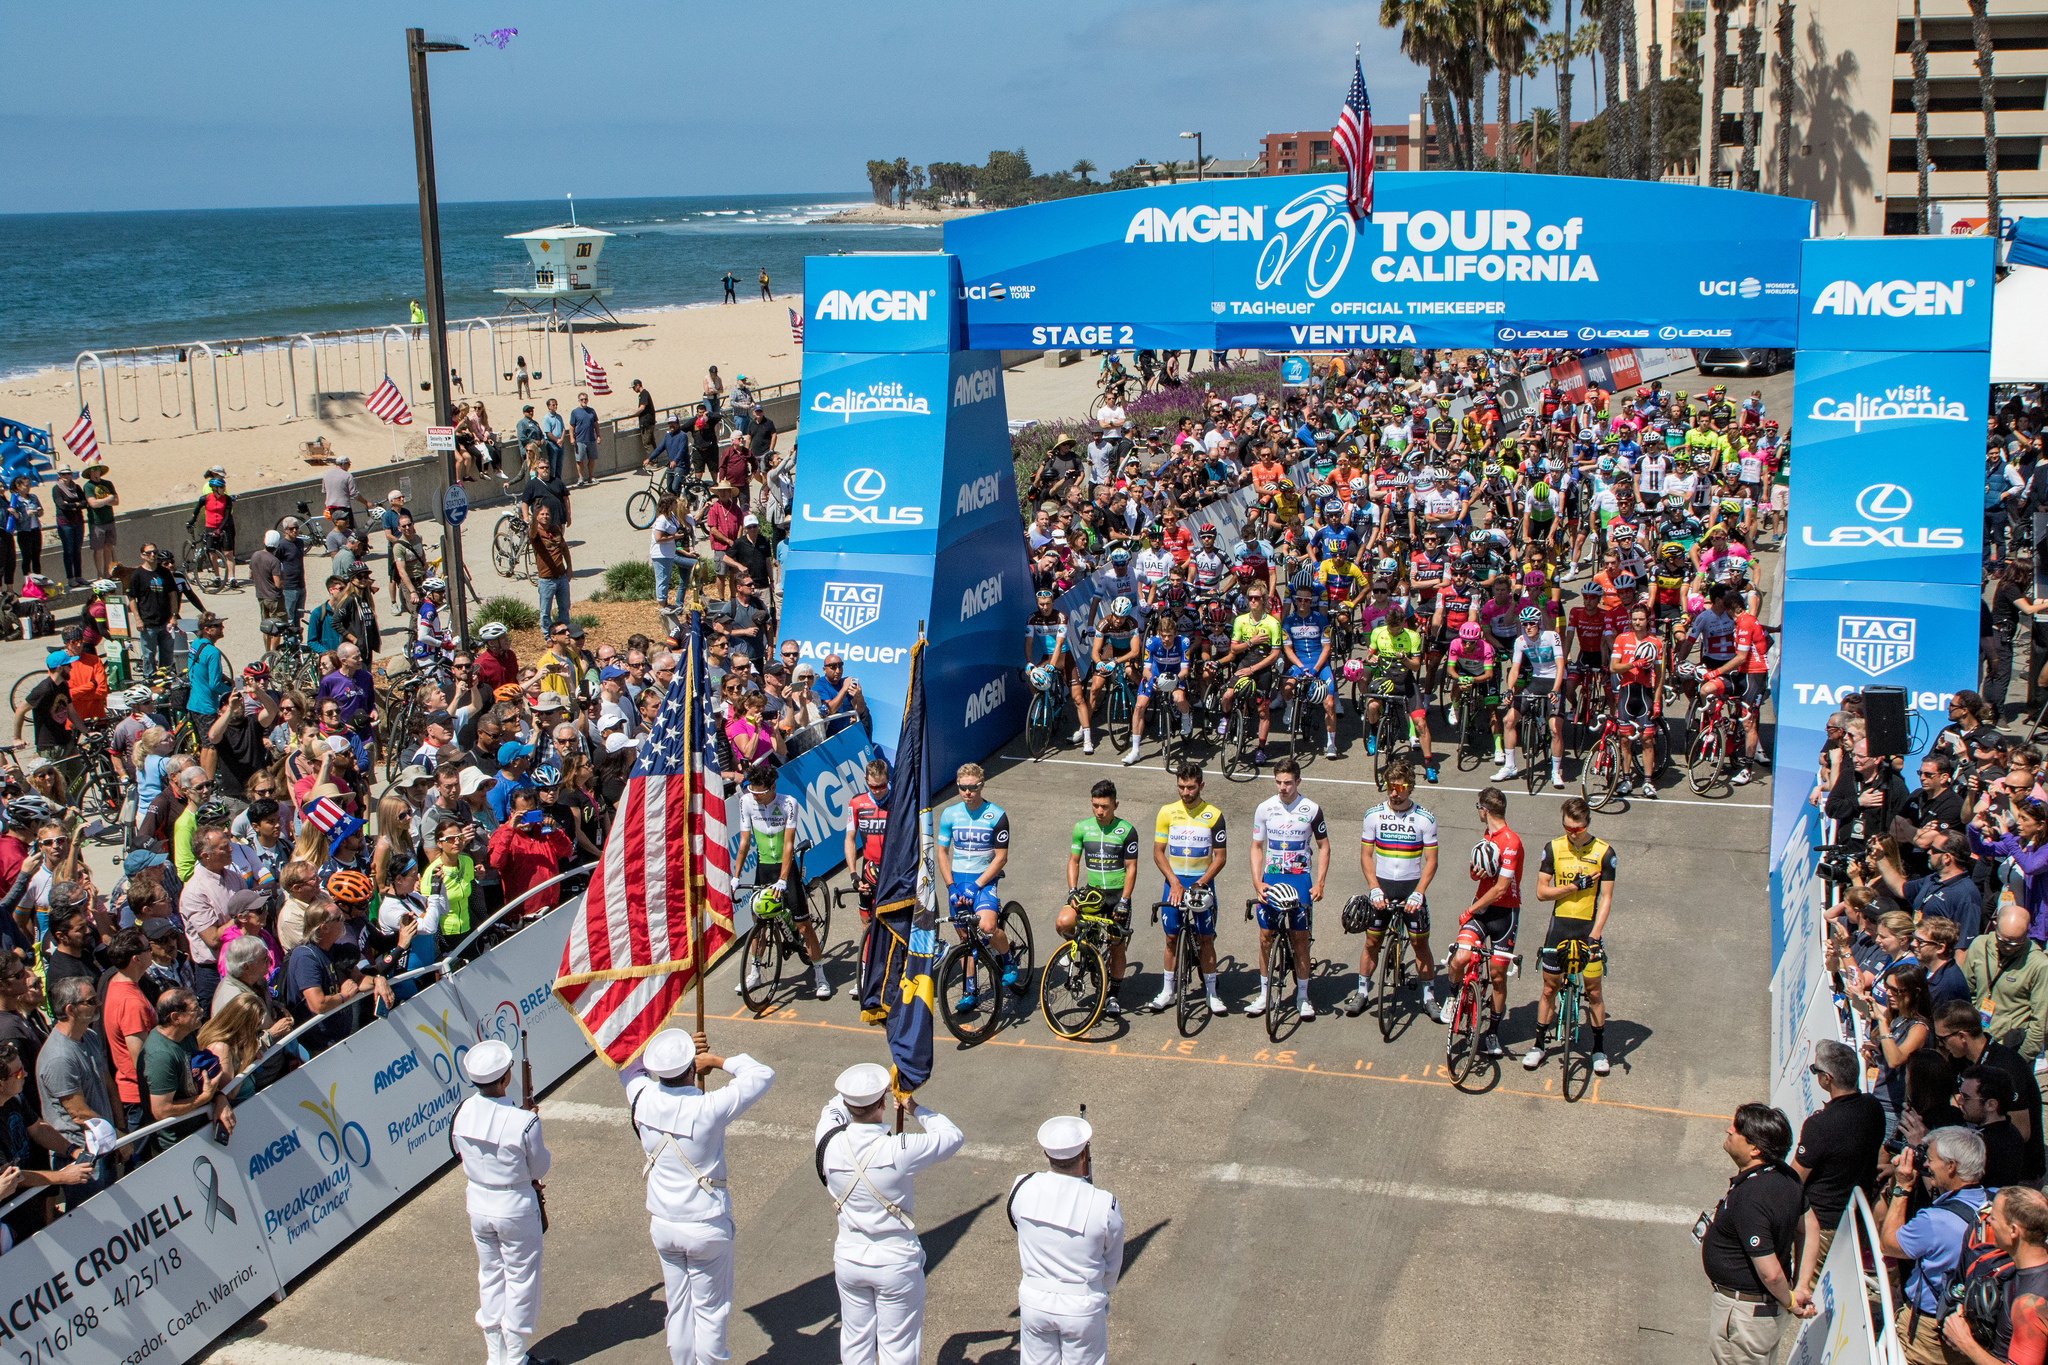 Images from Ventura as the Amgen Tour of California